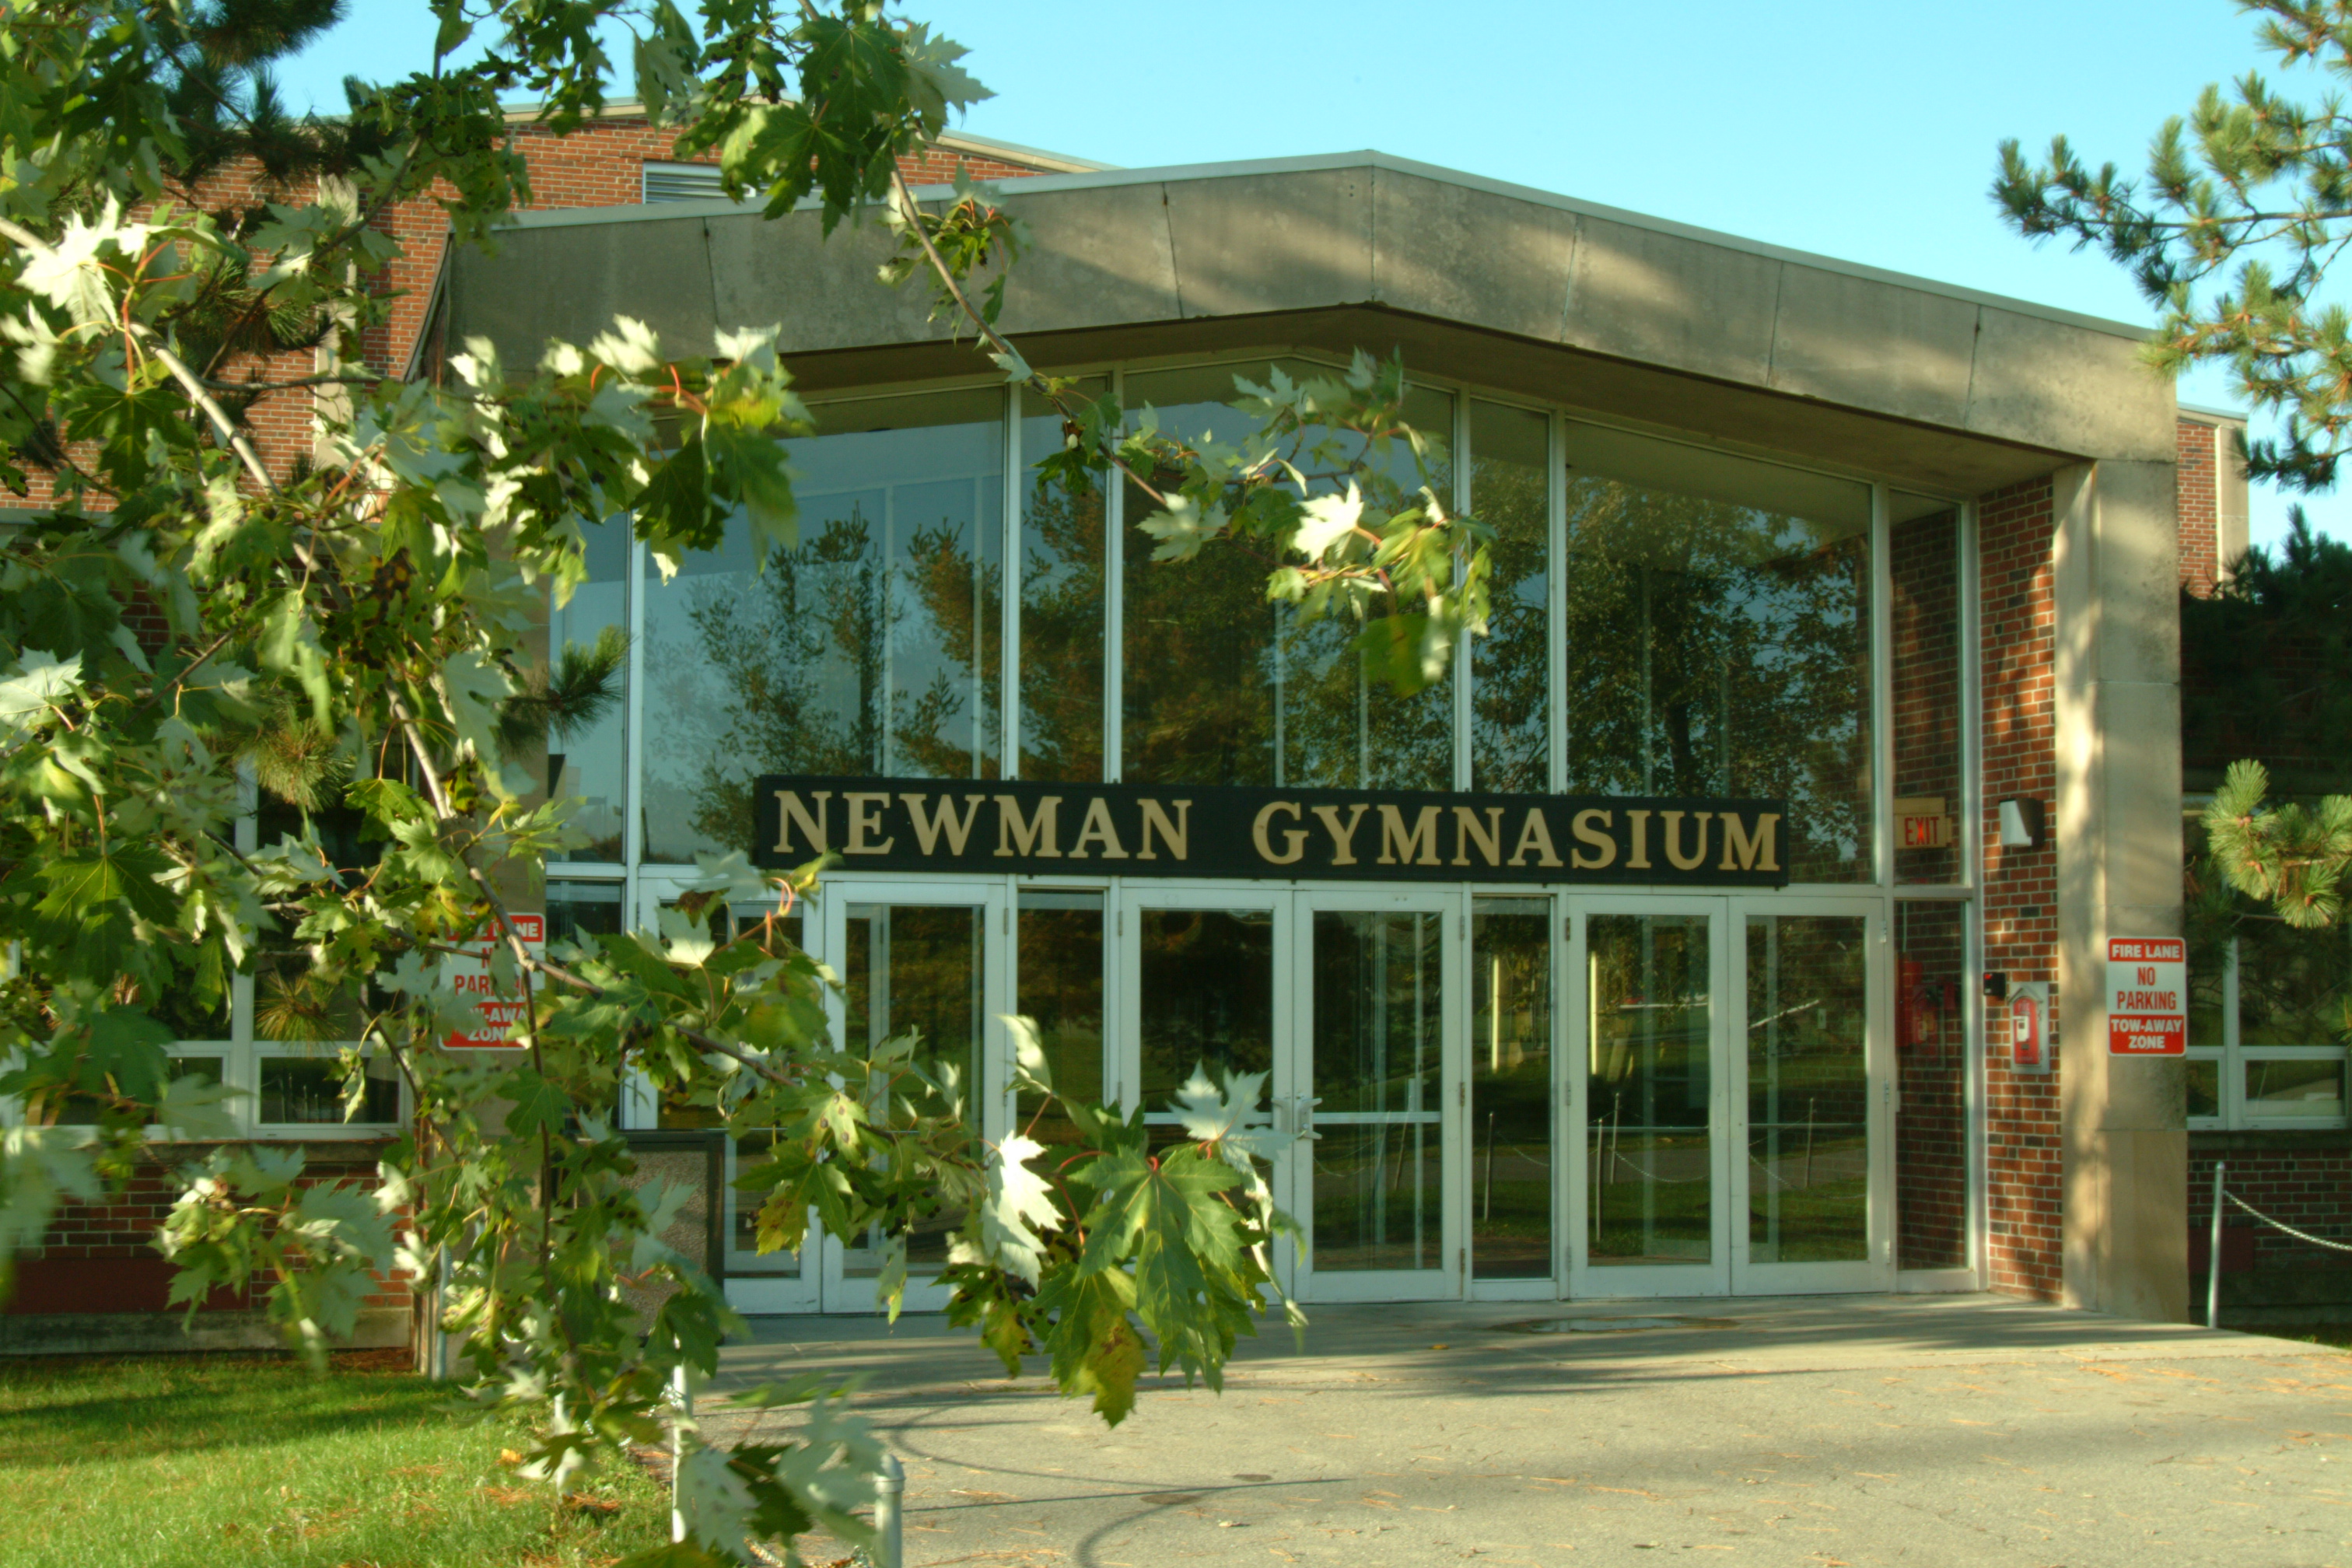 Newman Gymnasium will be the site of Husson University’s Organization of Physical Therapy Students' (OPTS) 18th Annual Wheelchair Basketball Tournament.